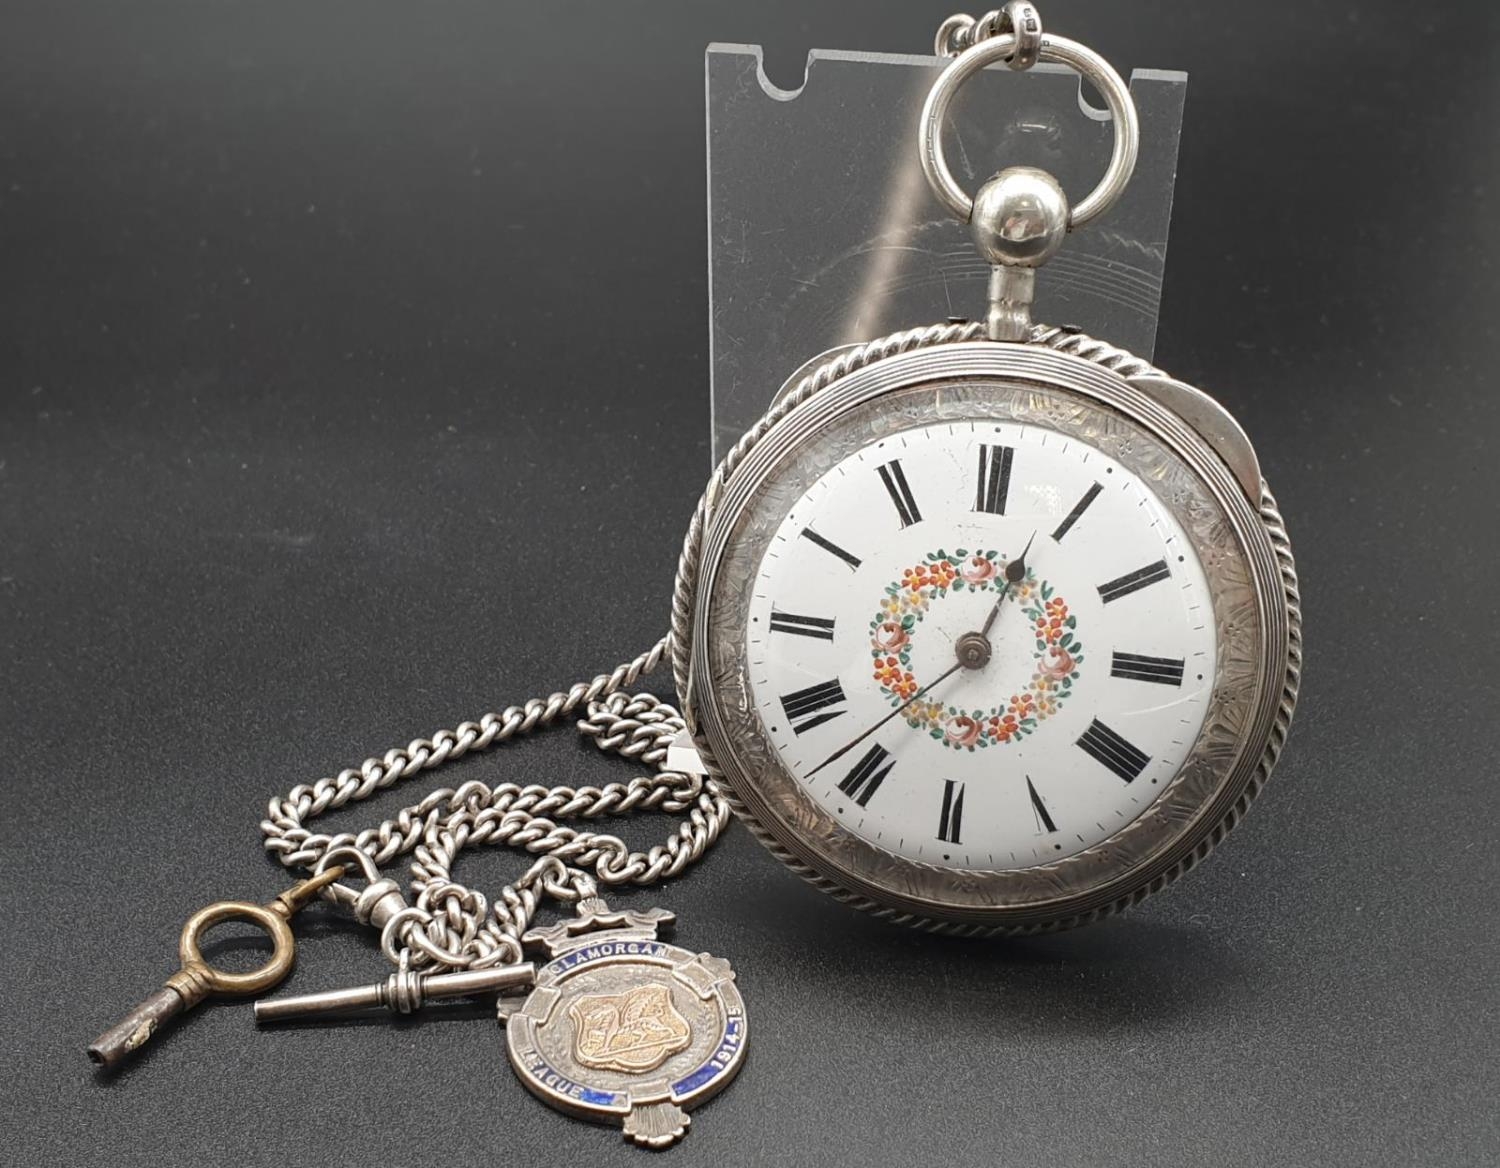 Brilliantly-Crafted Antique Chiming Silver Pocket Watch. Detailed engraving on rear case. White dial